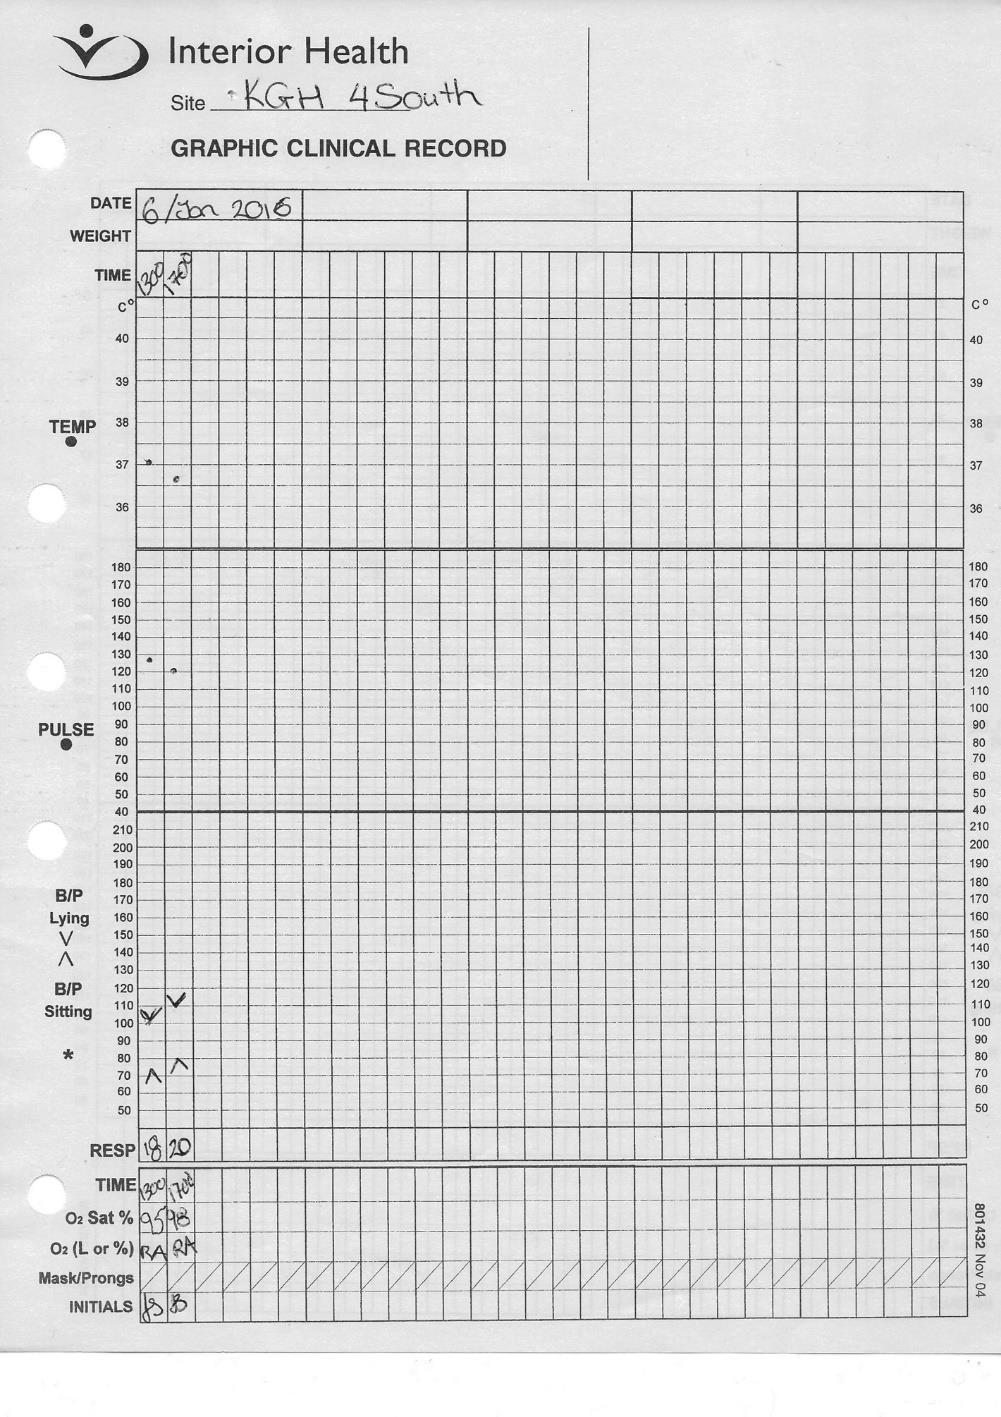 Figure 1 - An example of a typical patient vitals chart 1.